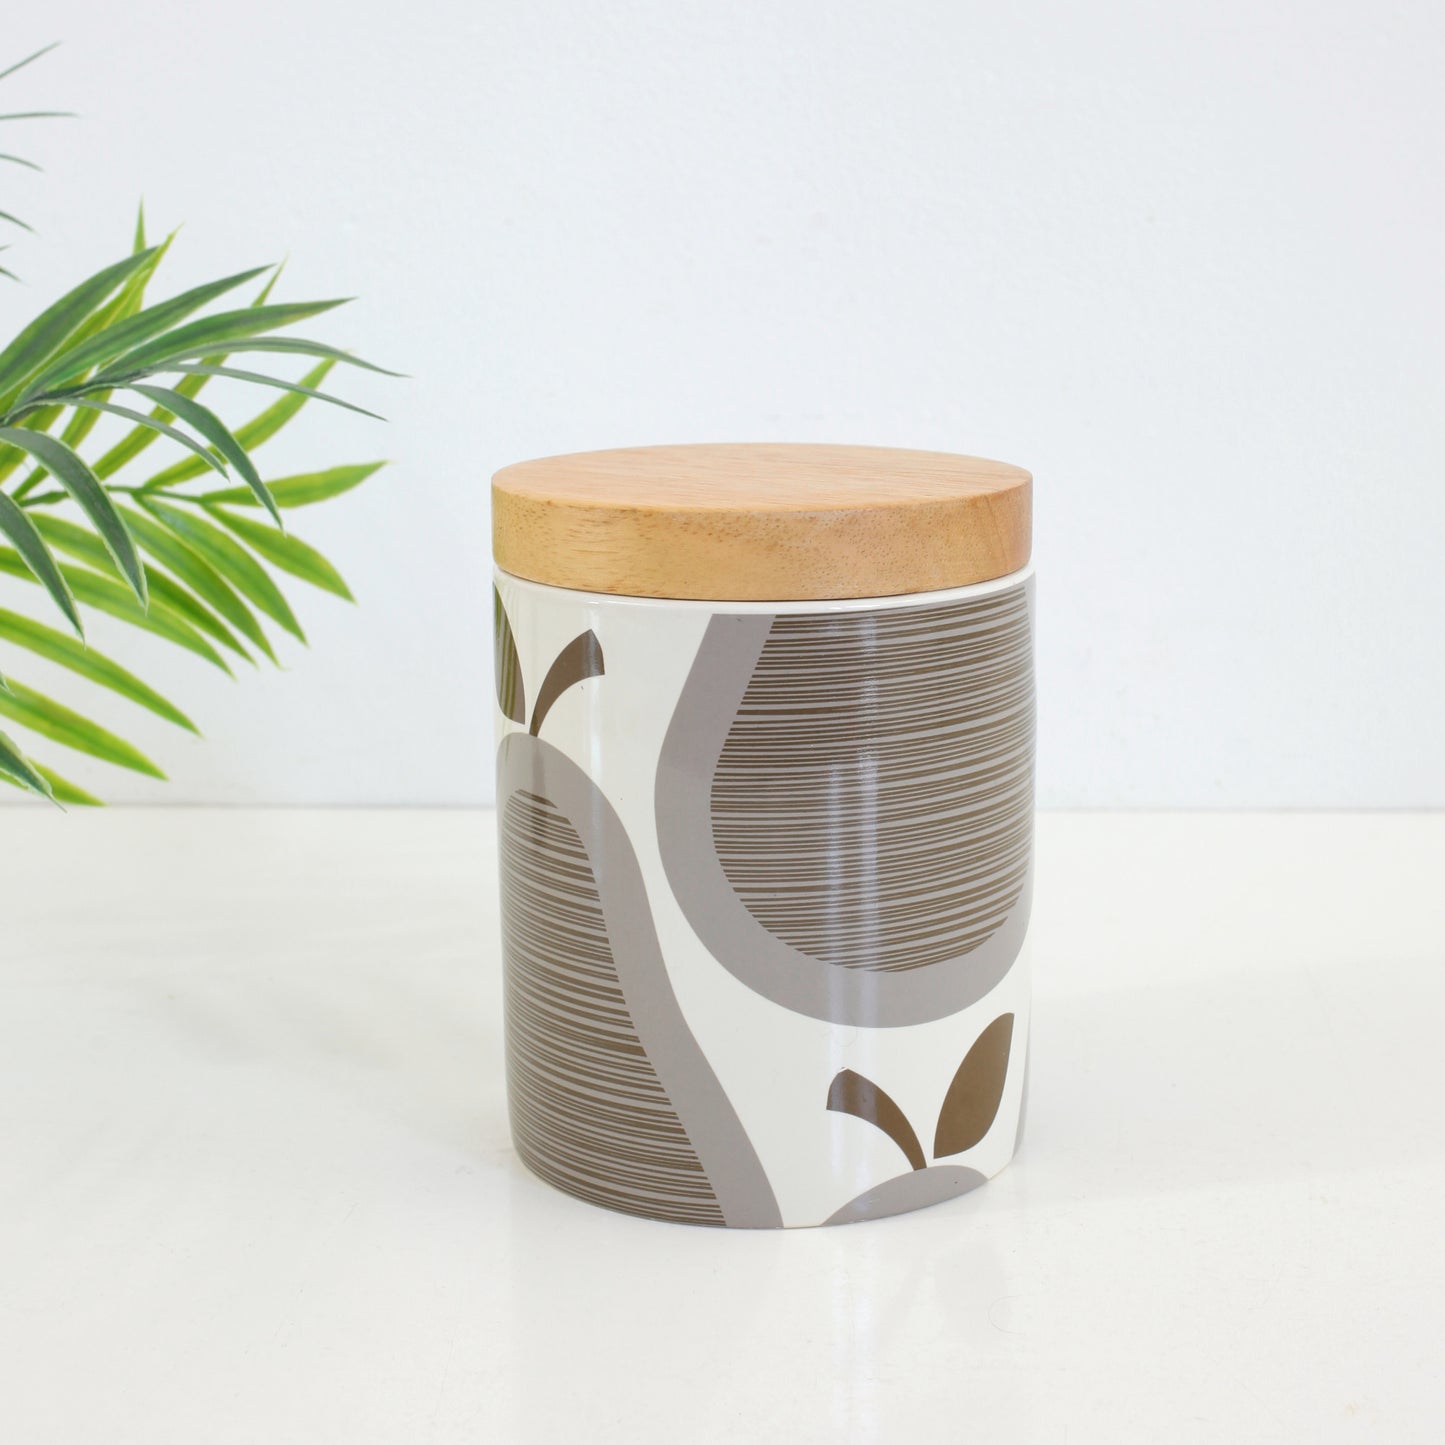 SOLD - Orla Kiely for Target Gray Pears Small Stoneware Canister